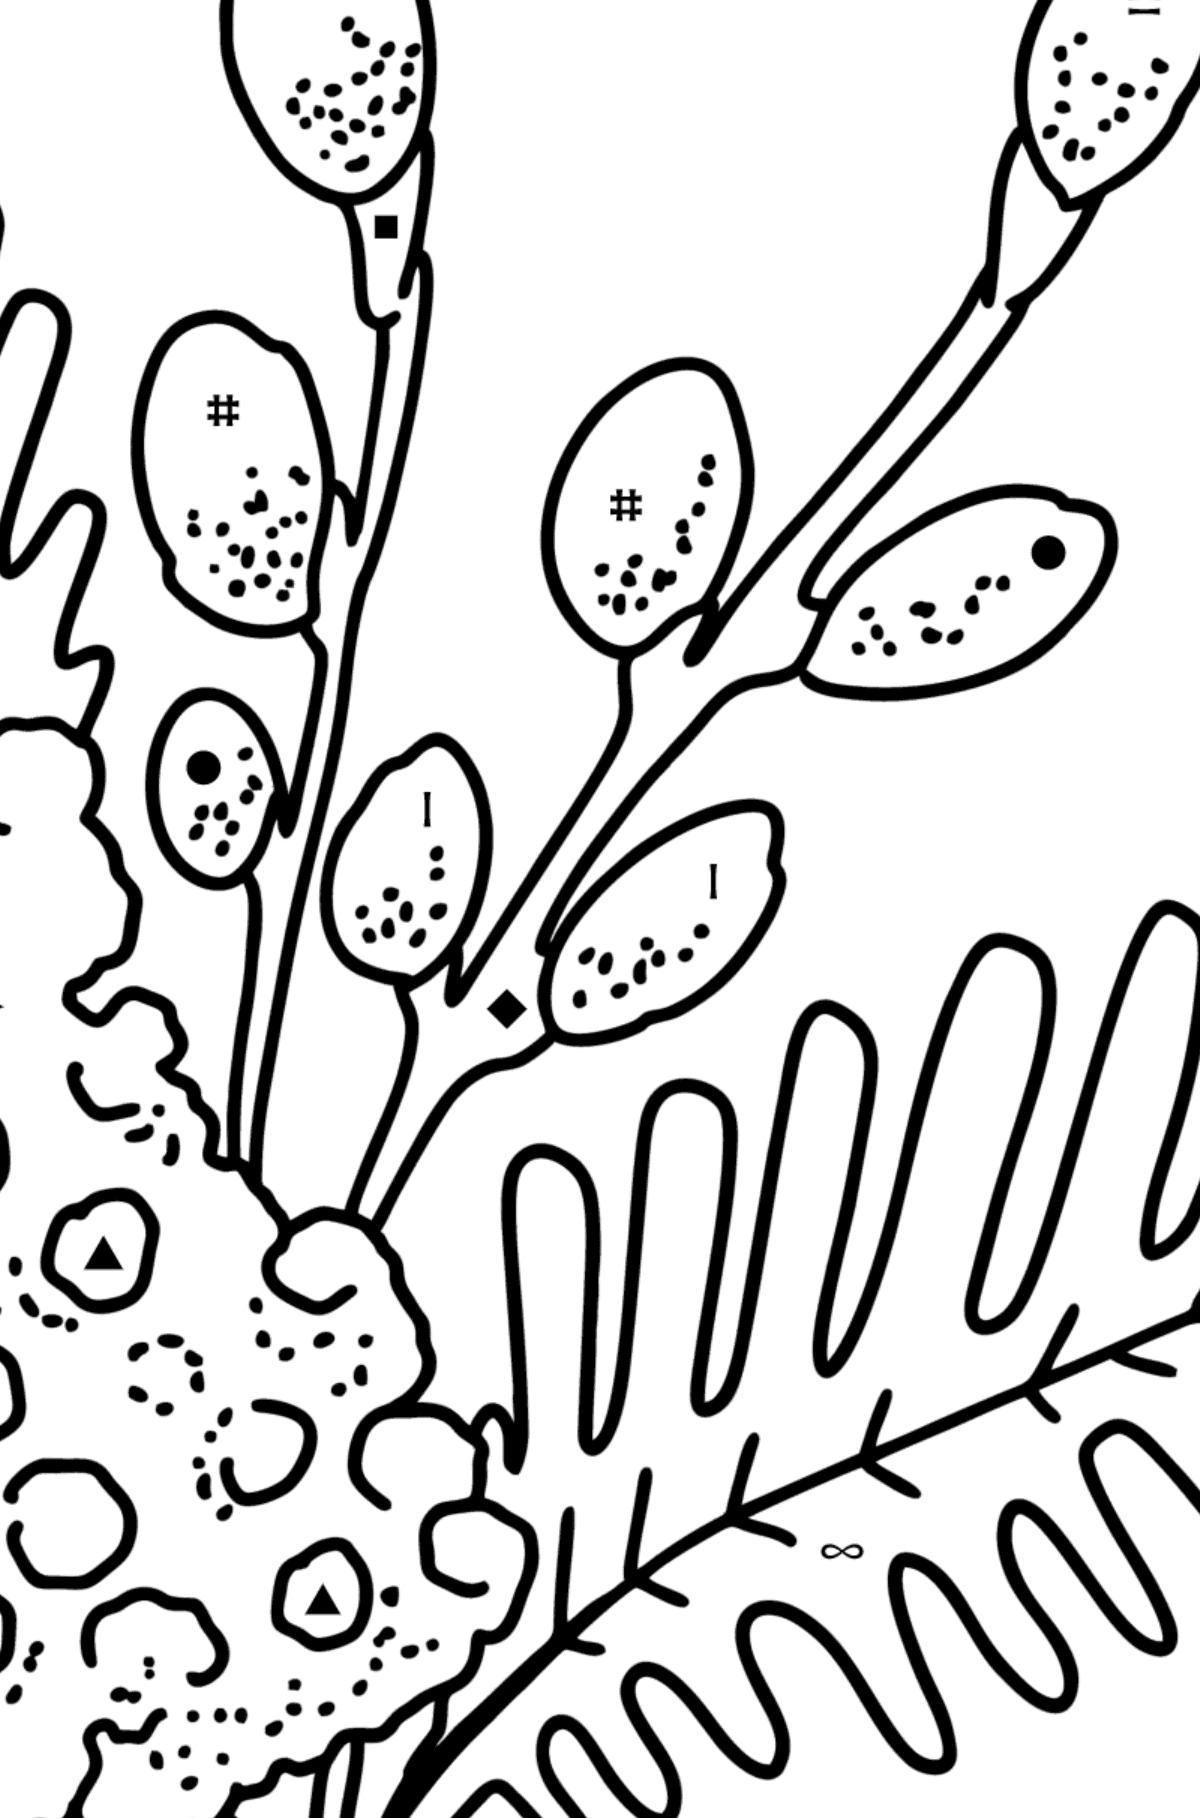 Coloring page - Mimosa and Pussy Willow - Coloring by Symbols for Kids